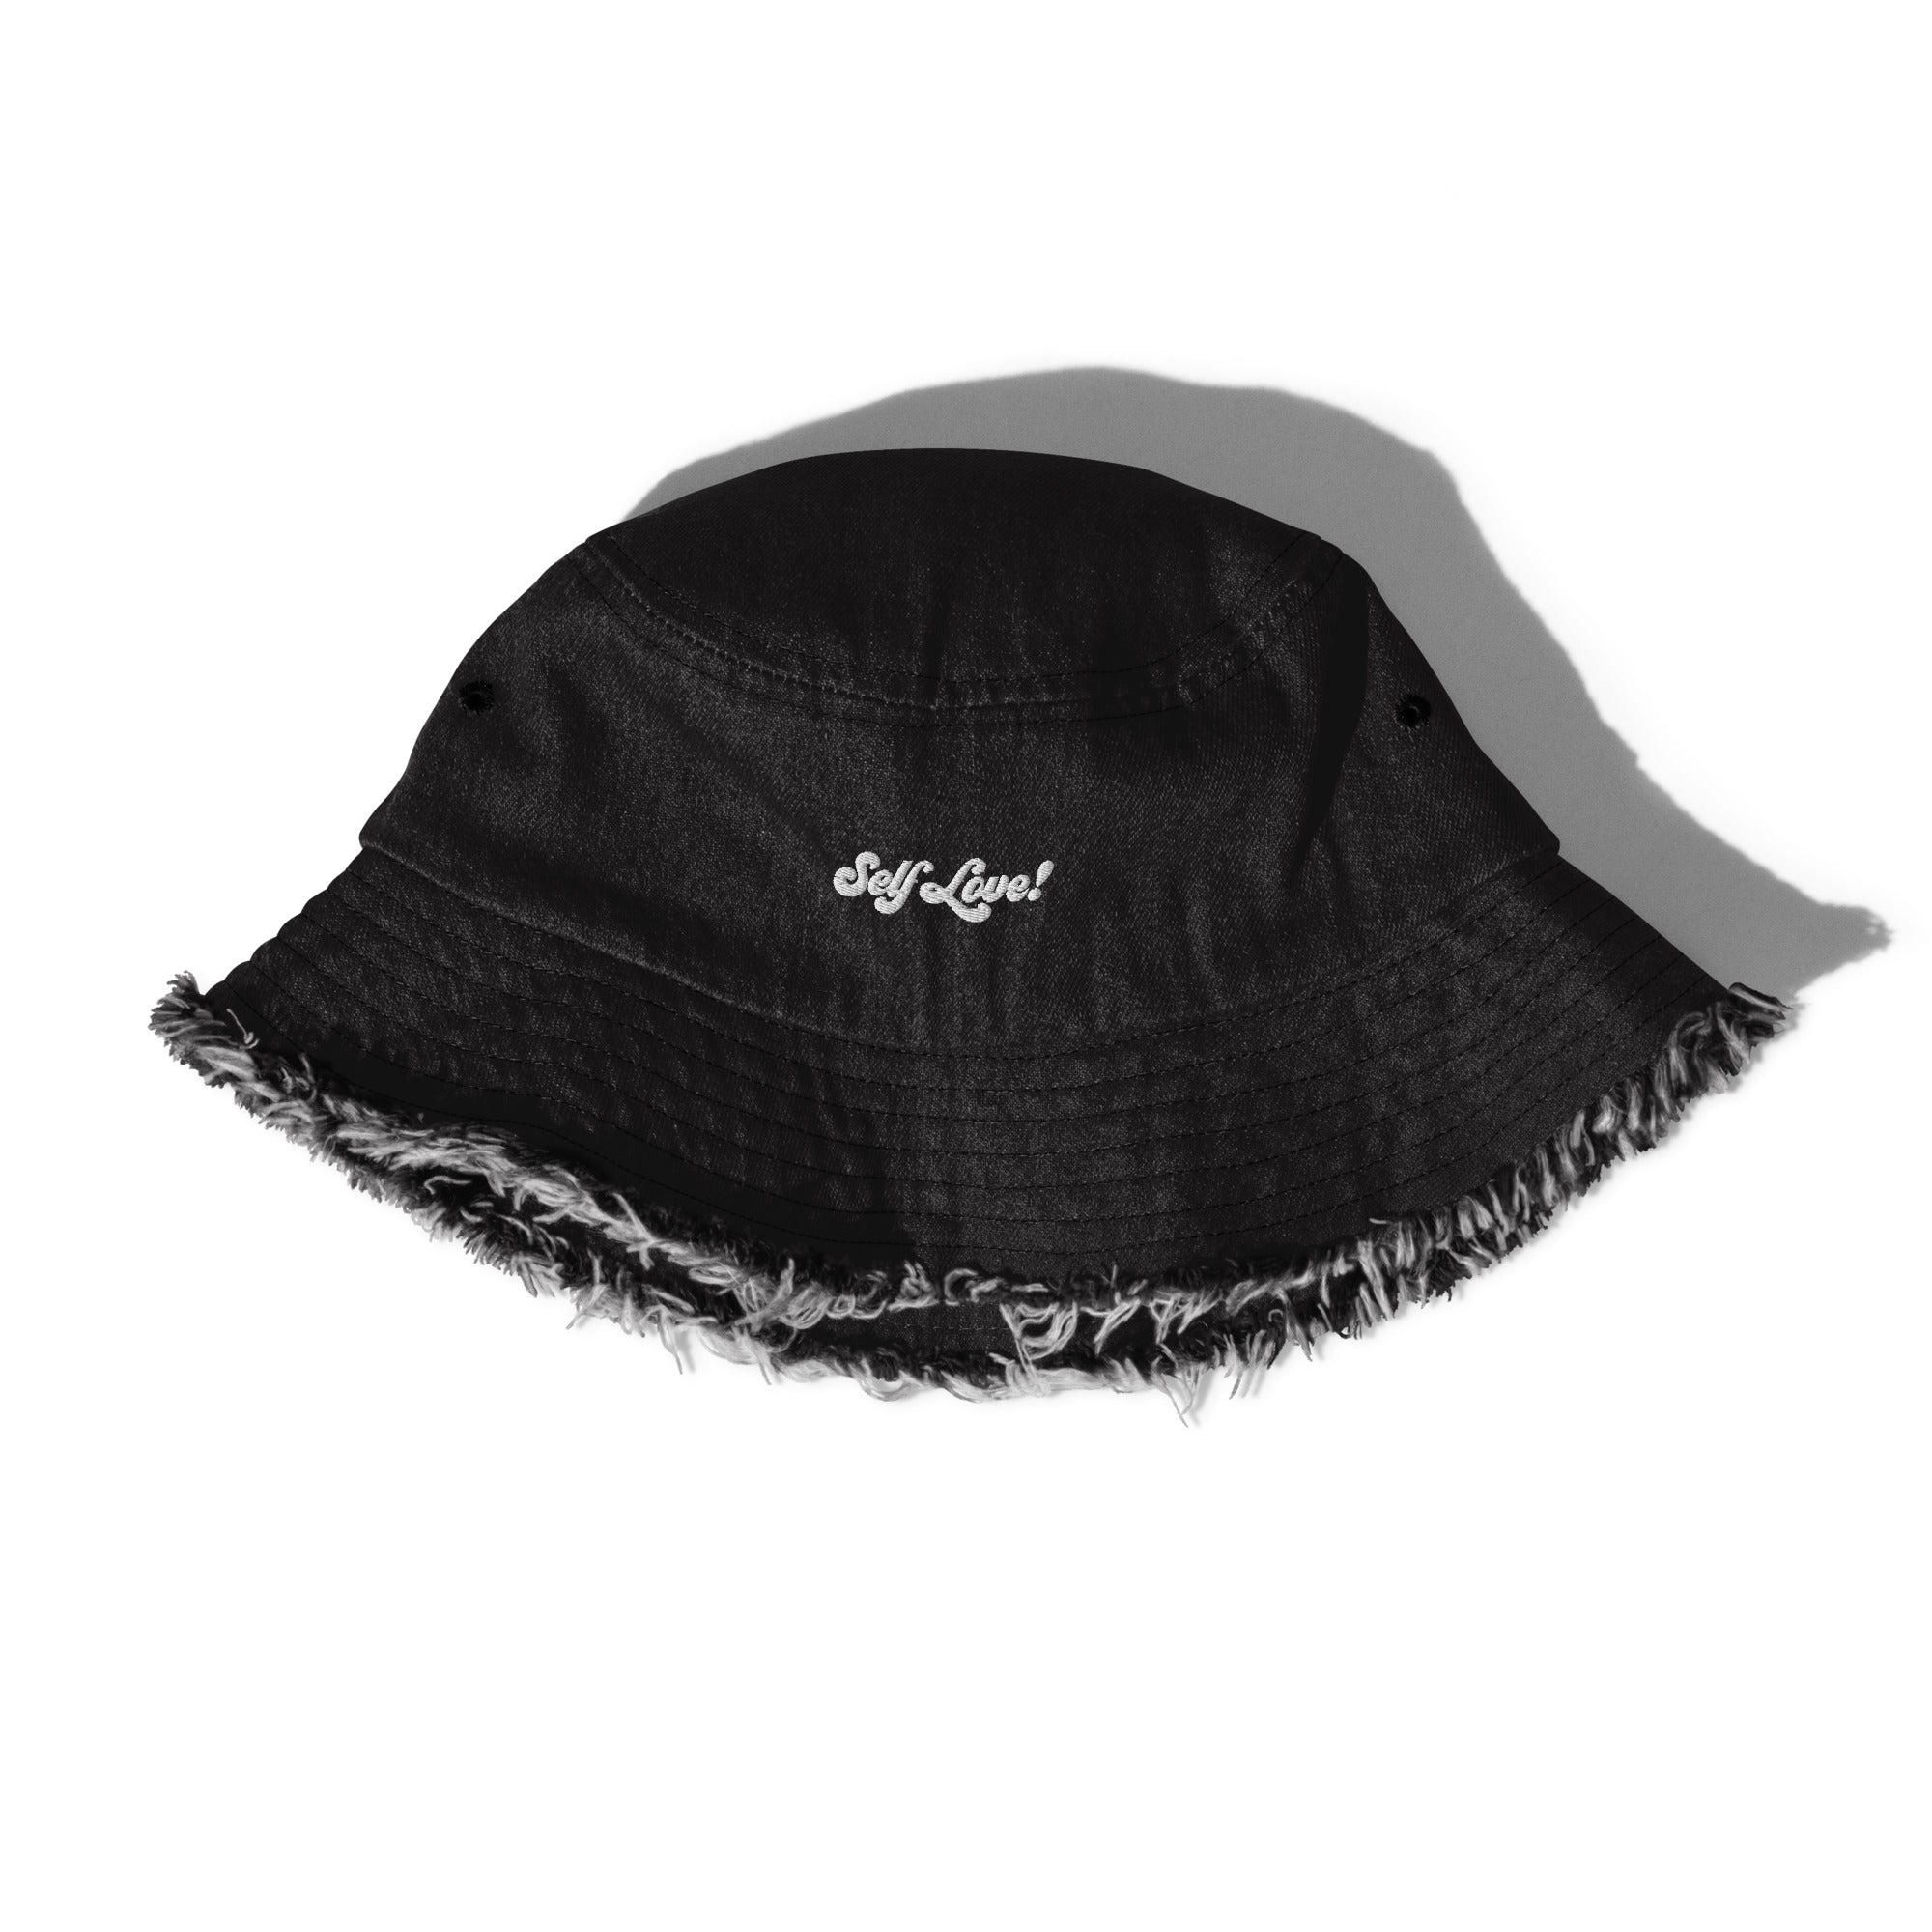 Self Love! Personalize it with your own! Distressed denim bucket hat